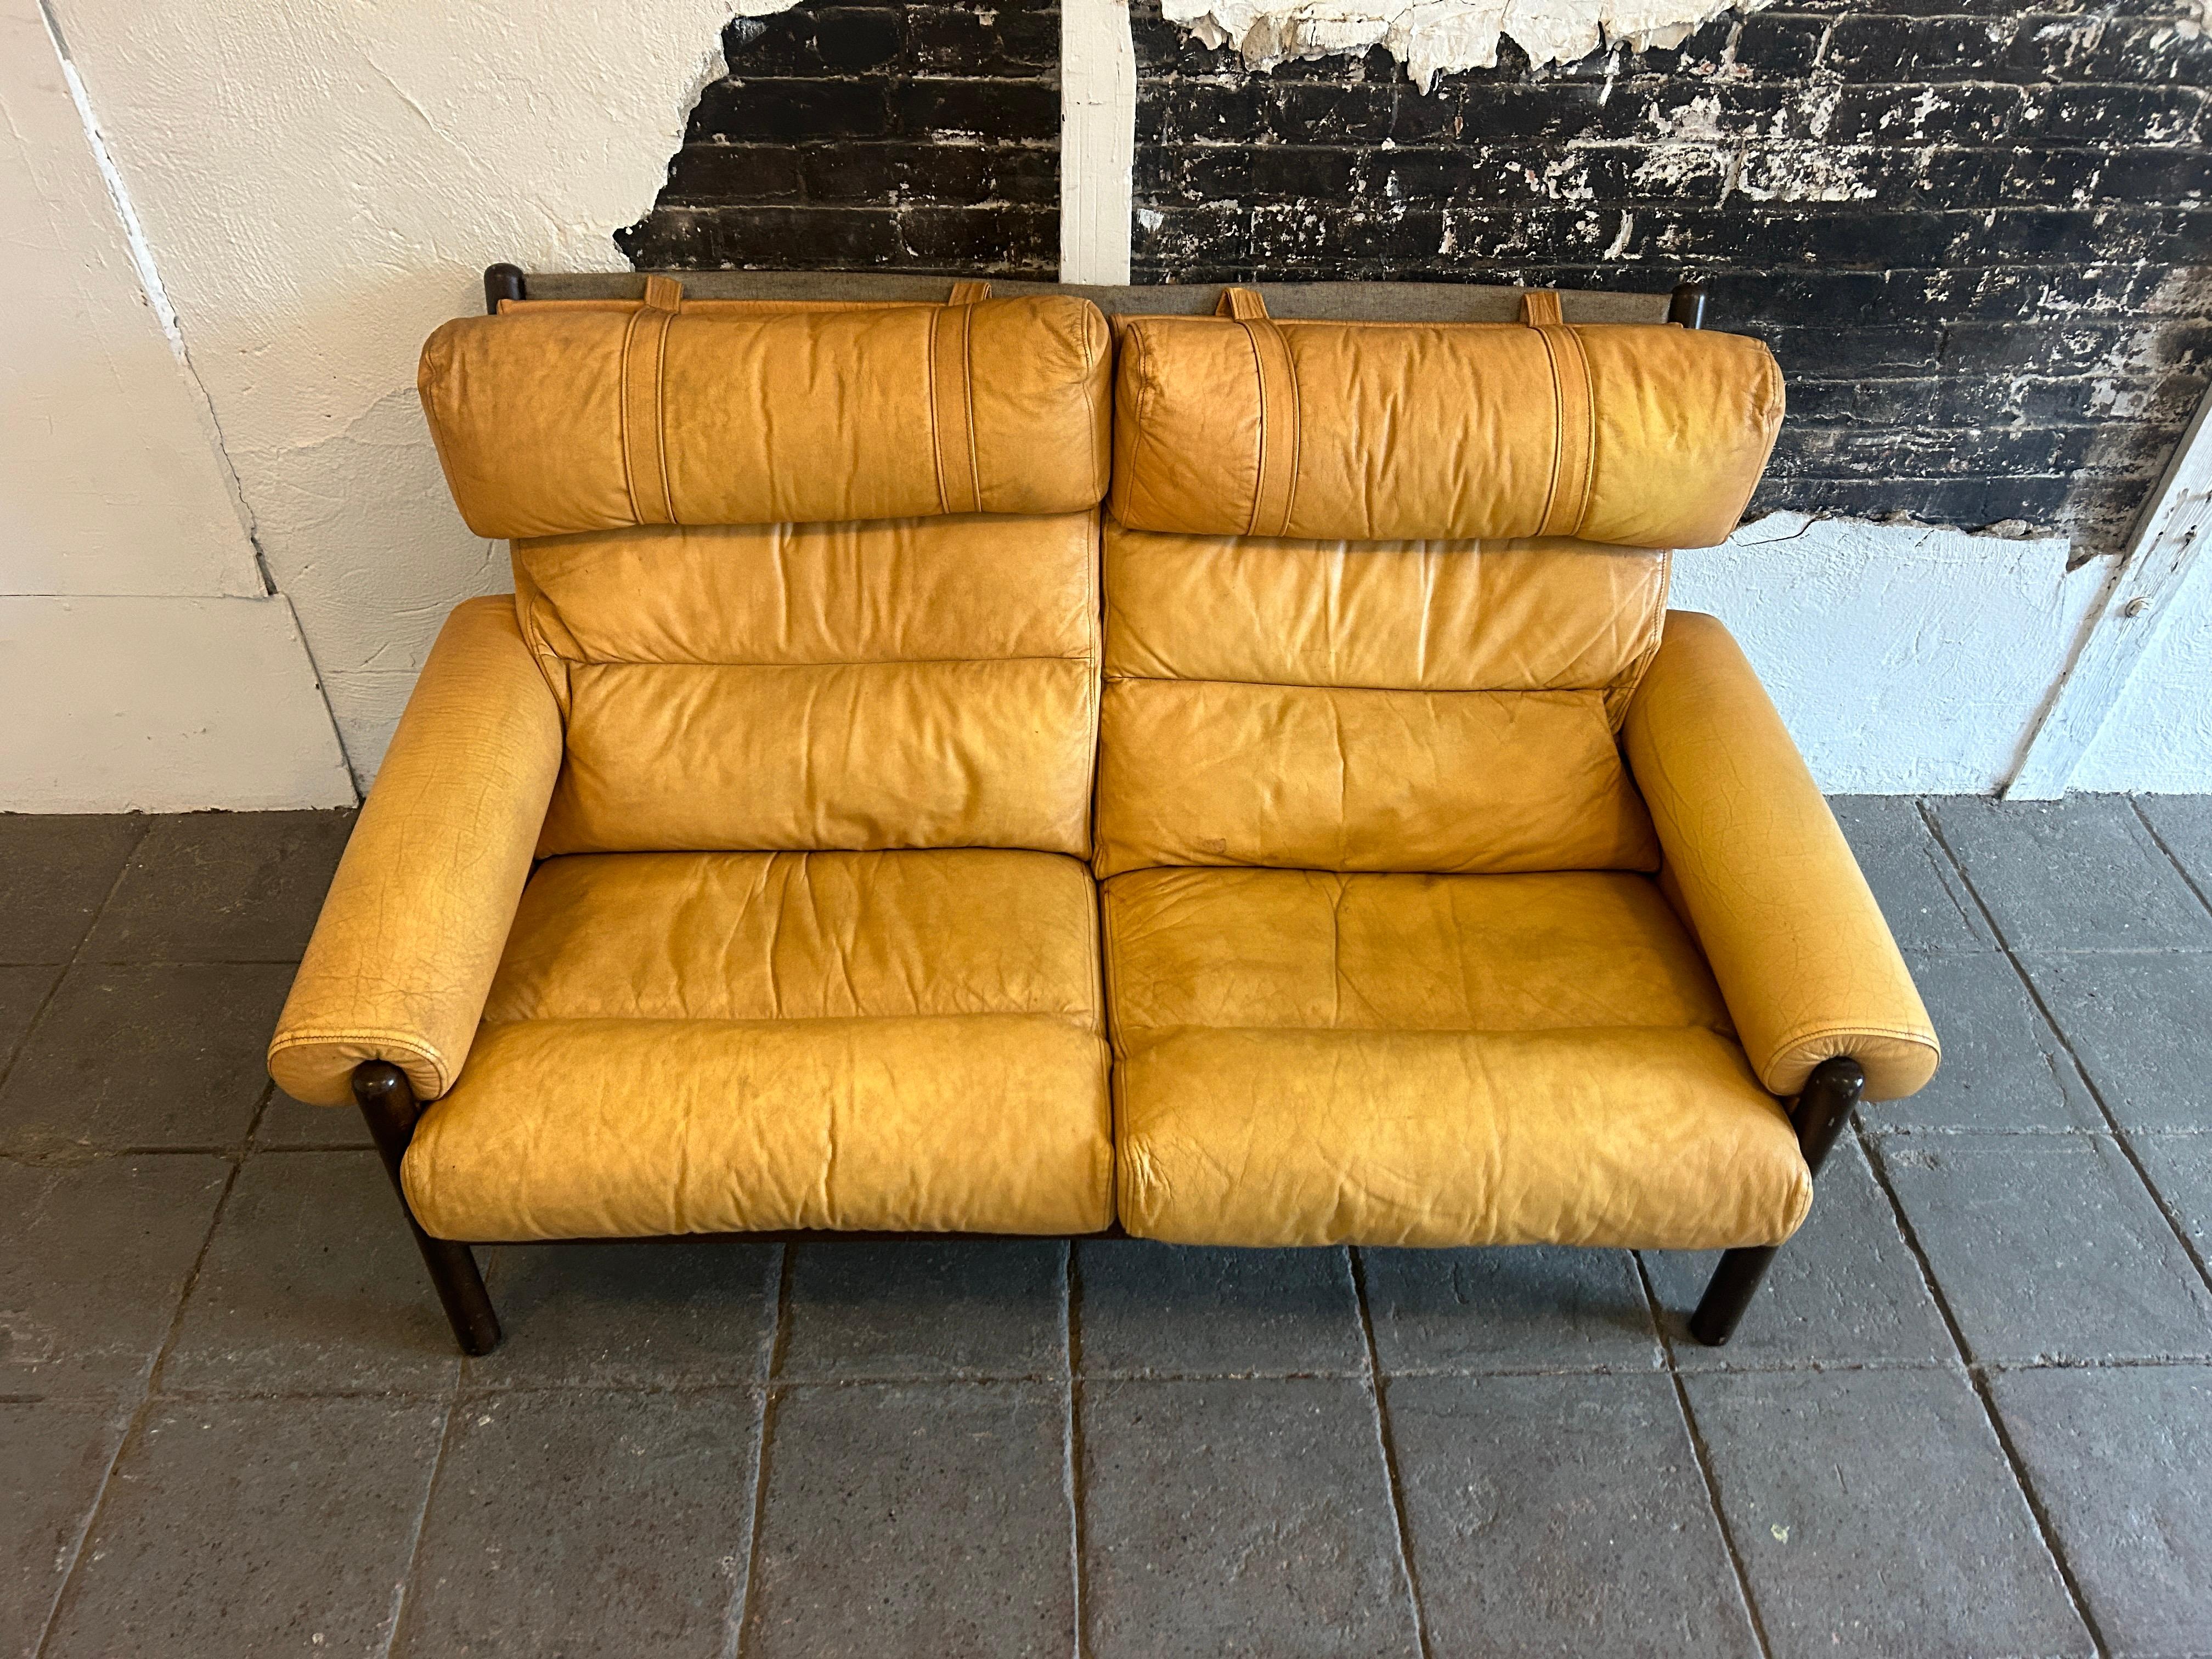 In the style of Arne Norell Safari Loveseat sofa Swedish Design

Mid-century modern teak and yellow / tan leather 2 seat small sofa. Has 2 seats with strapped pillow headrest very comfortable. Shows wear and creases to leather, wood with wear